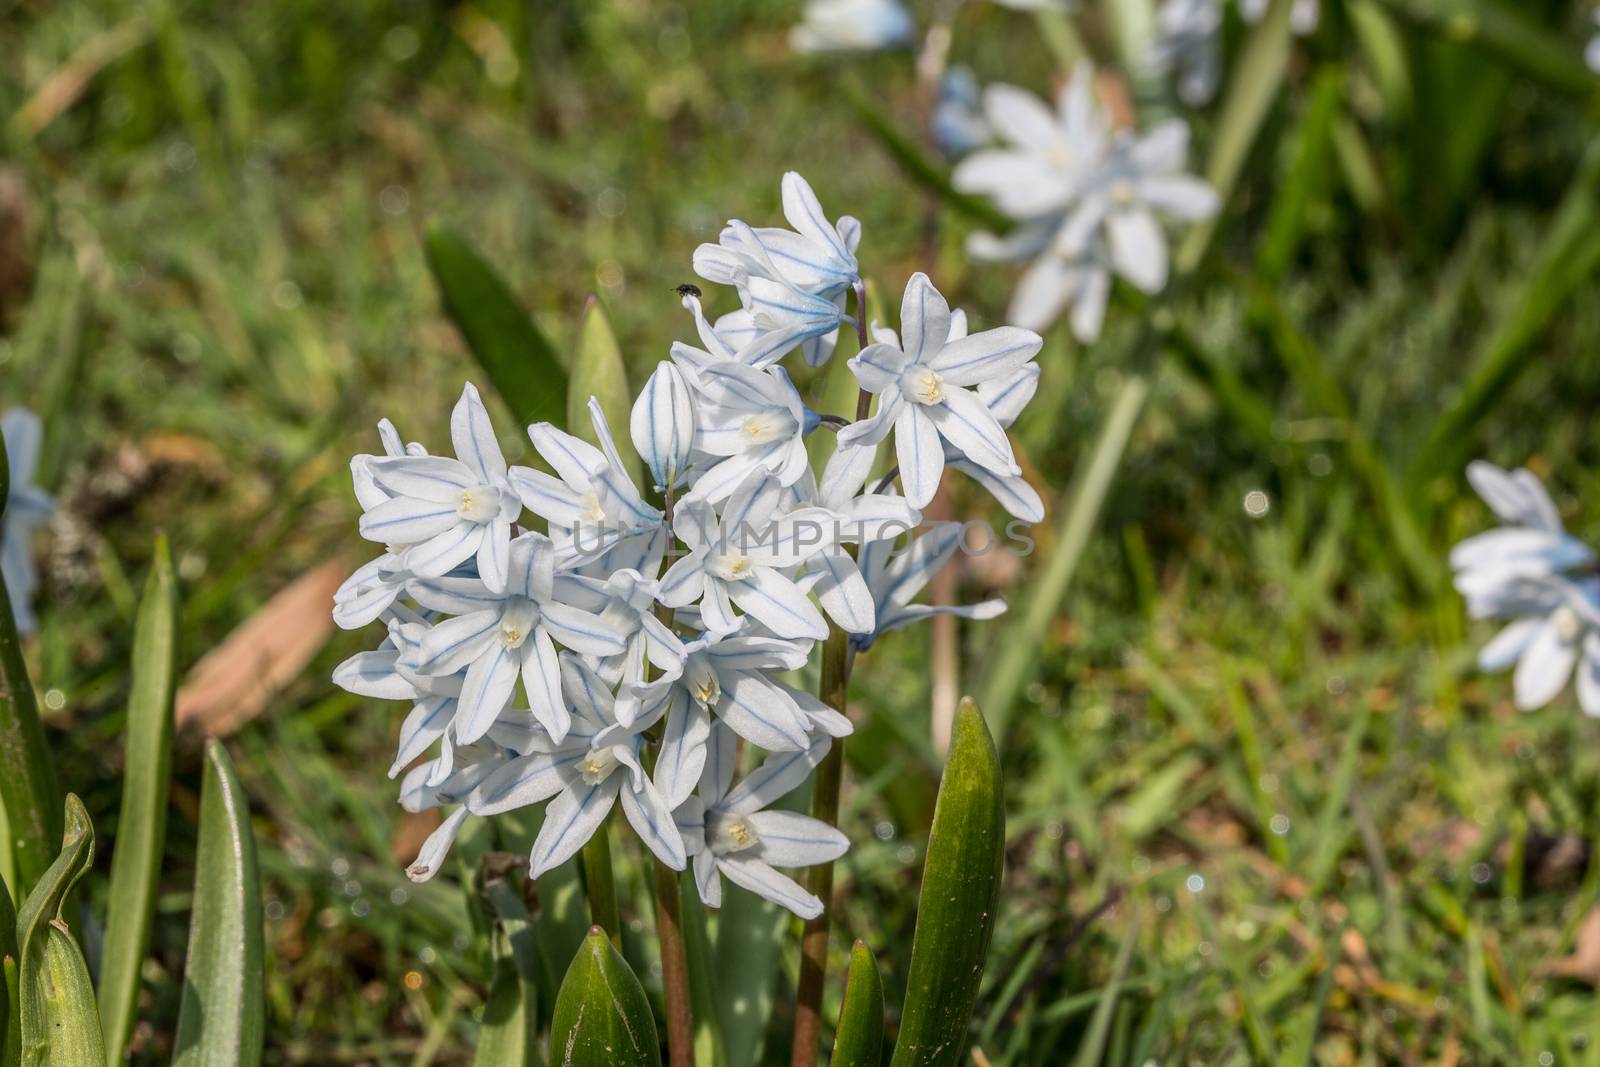 Umbel milk star with white flowers in the park by Dr-Lange